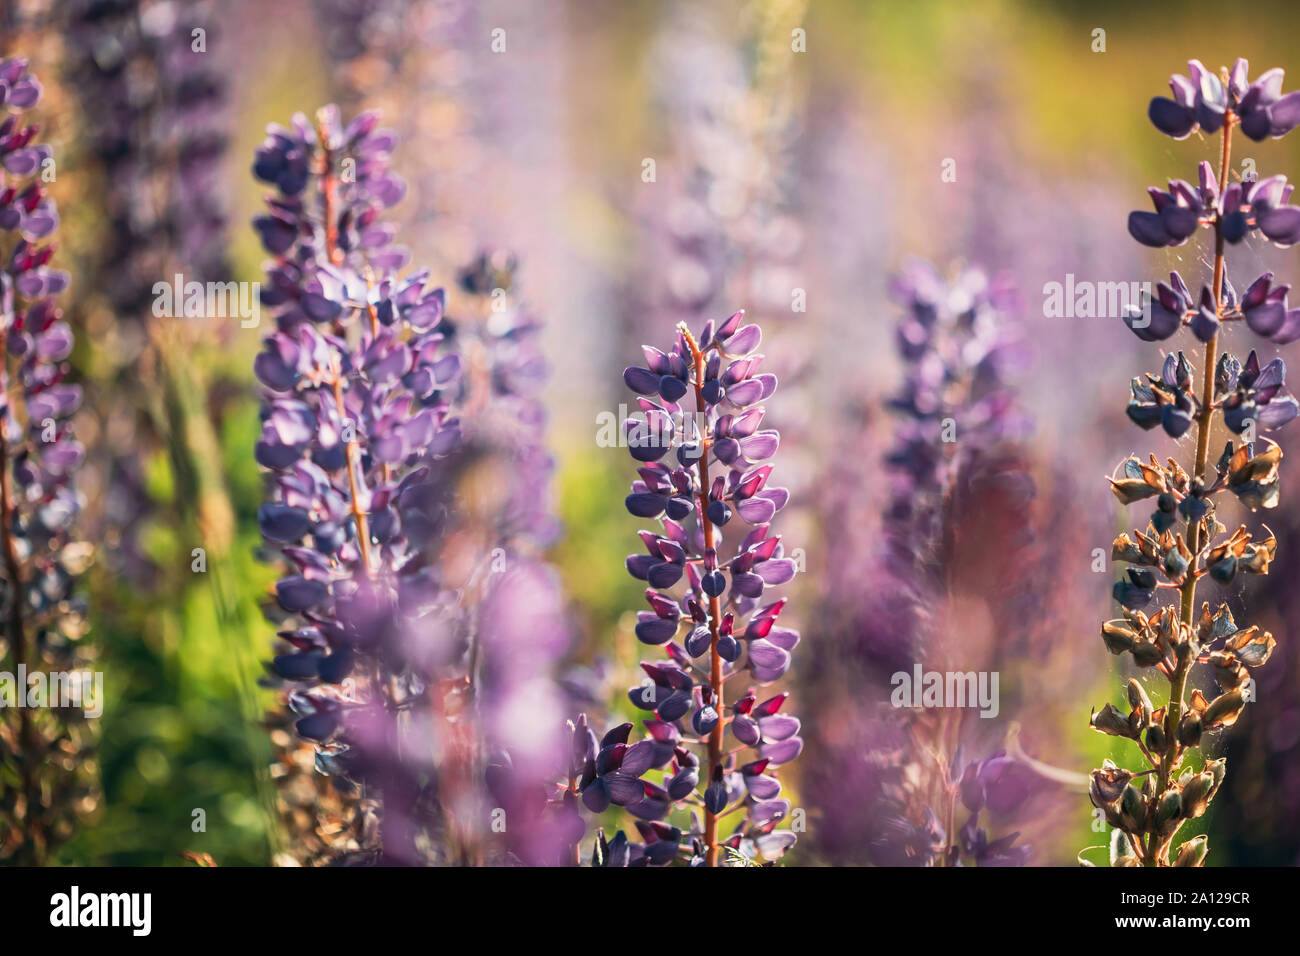 Bush Of Wild Flowers Lupine In Summer Field Meadow At Sunset Sunrise. Lupinus, Commonly Known As Lupin Or Lupine, Is A Genus Of Flowering Plants In Th Stock Photo